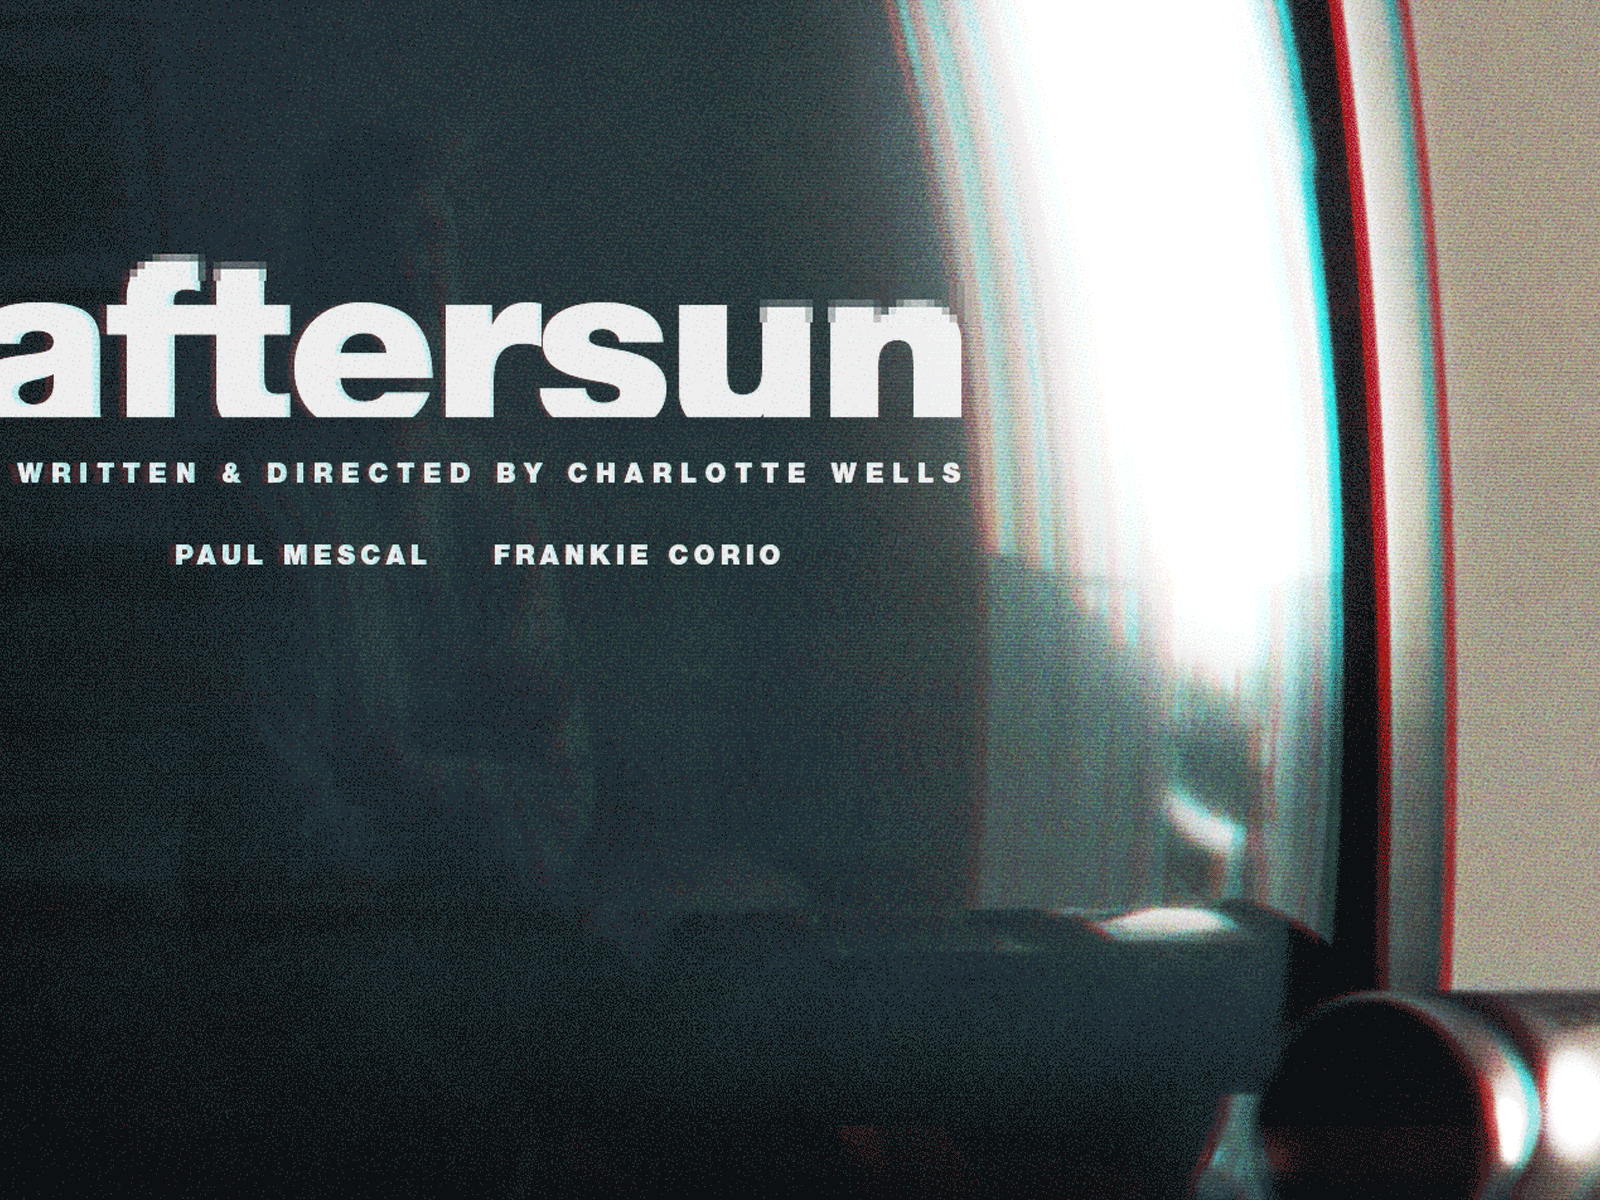 Charlotte Wells’ ‘Aftersun’ a24 aftersun film poster film posters key art movie poster movie posters mubi poster poster design posters retro vhs